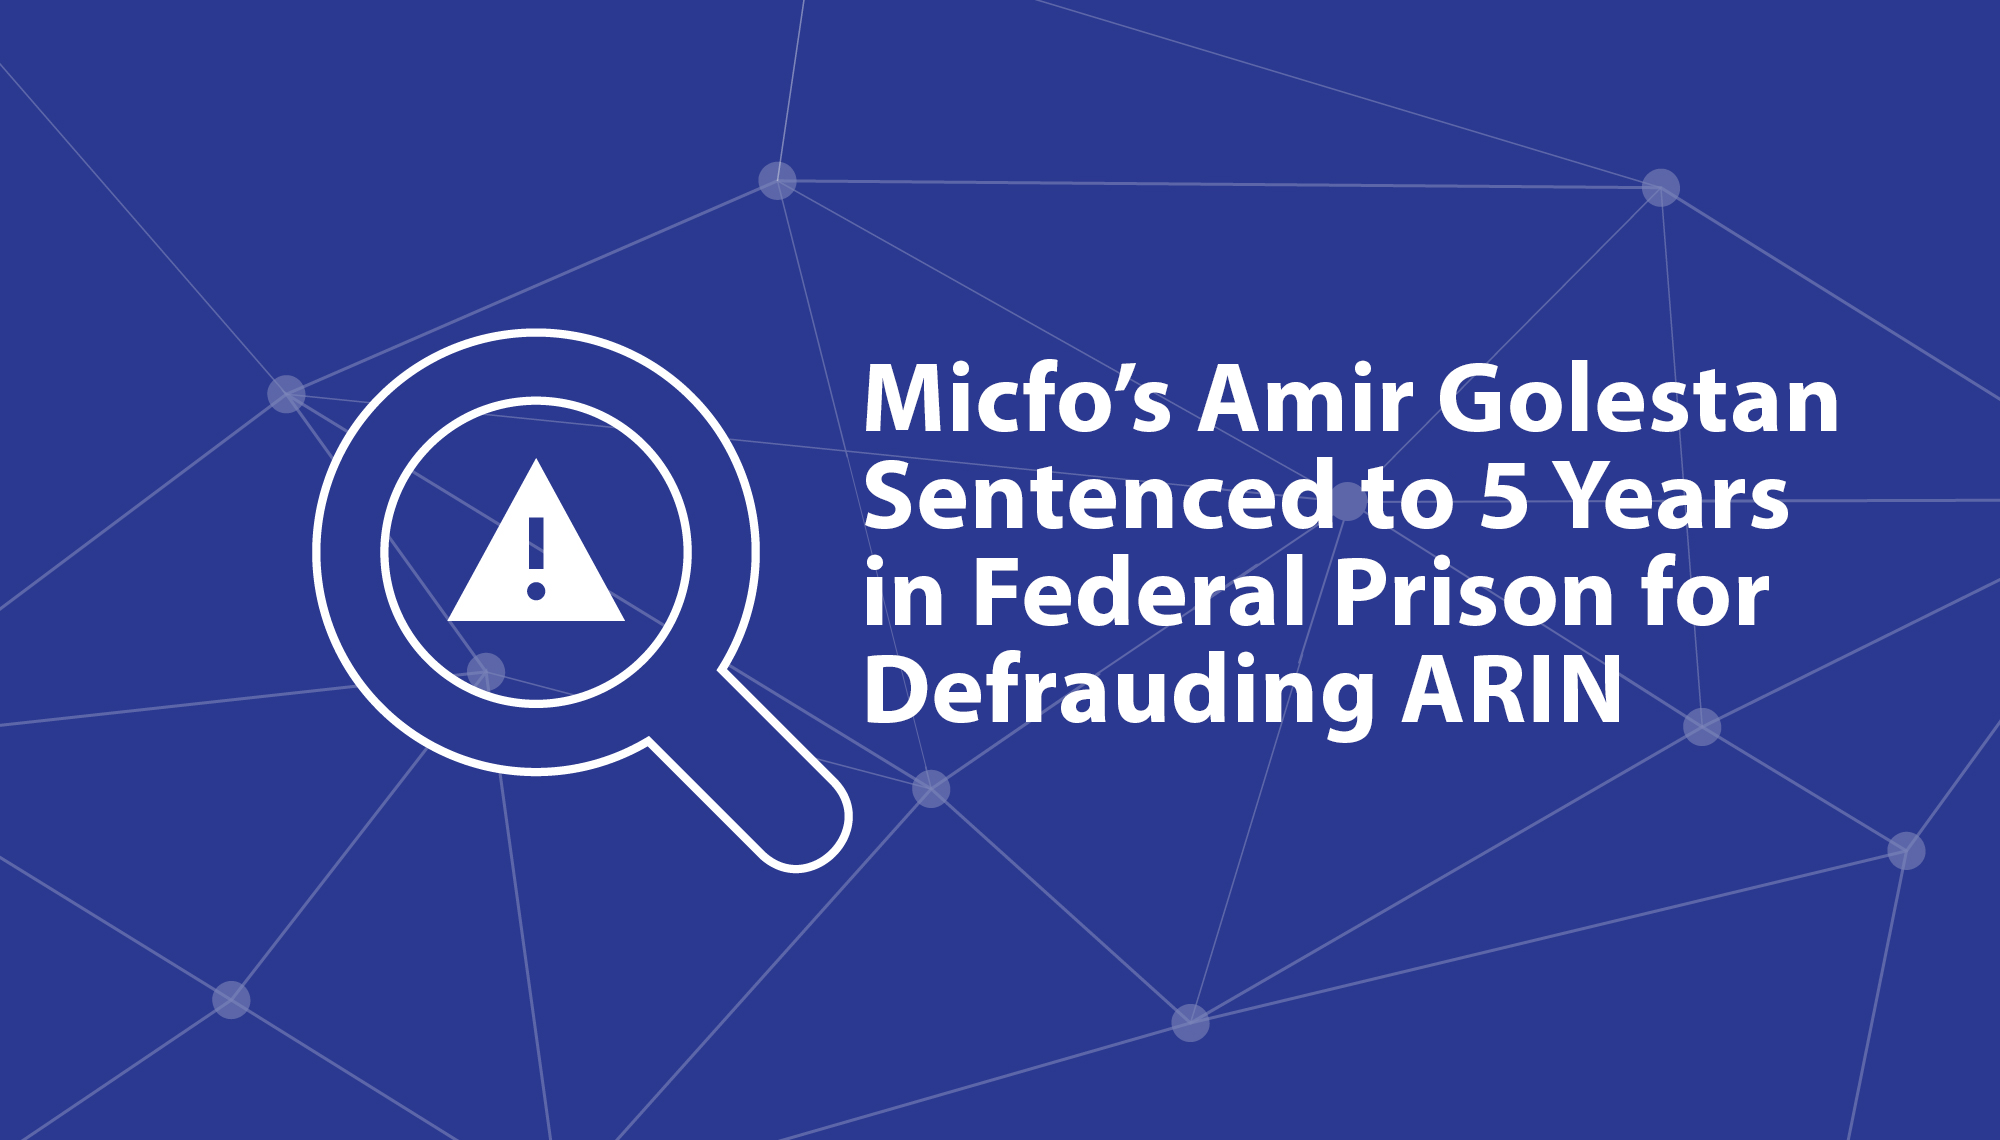 Micfo’s Amir Golestan Sentenced to 5 Years in Federal Prison for Defrauding ARIN